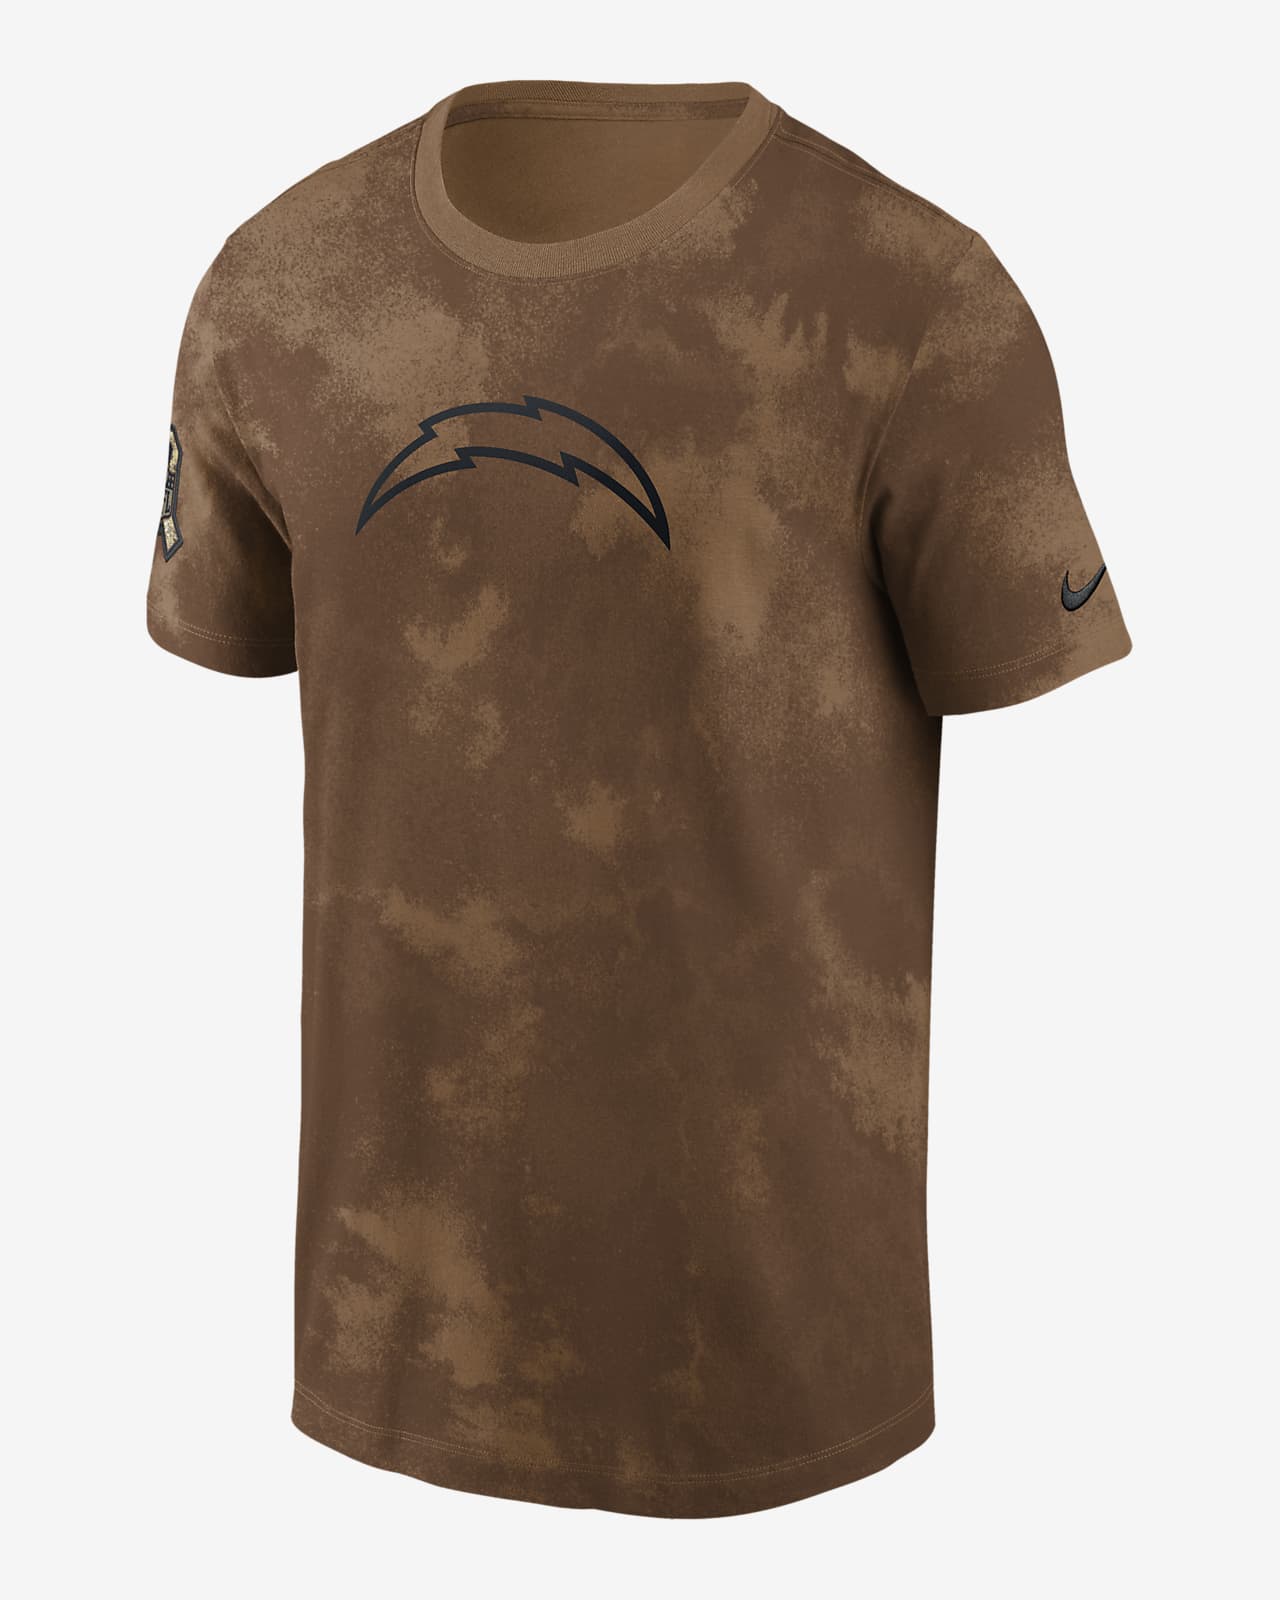 Los Angeles Chargers Salute to Service Sideline Men's Nike NFL T-Shirt